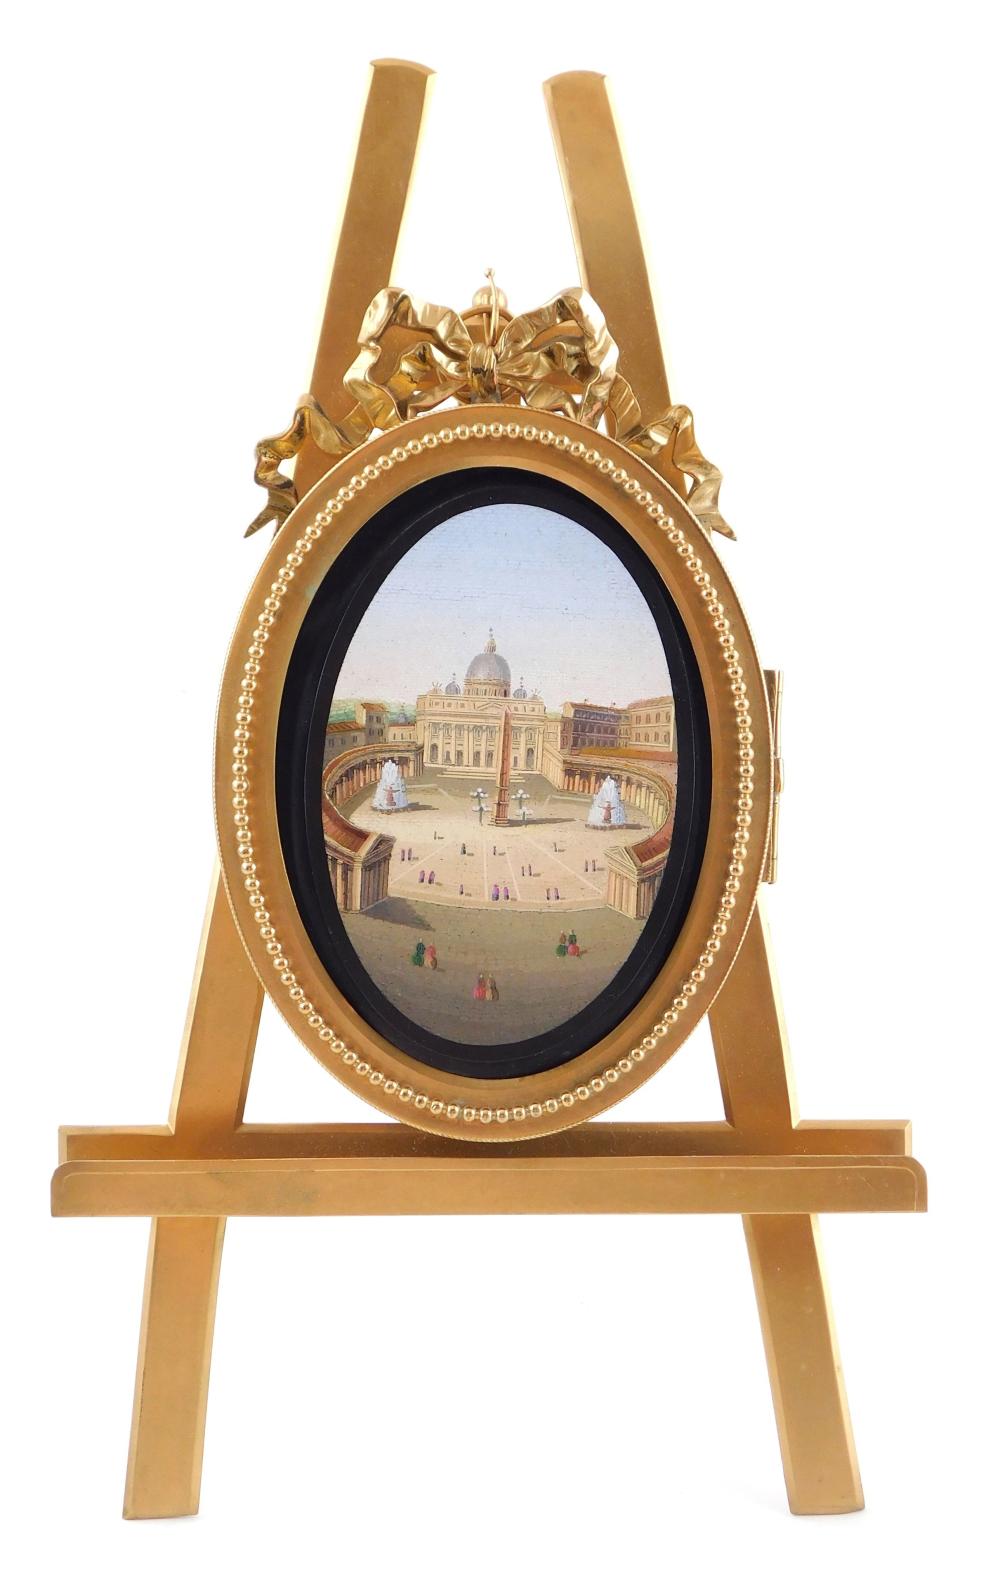 MICRO-MOSAIC OF THE VATICAN ON EASEL